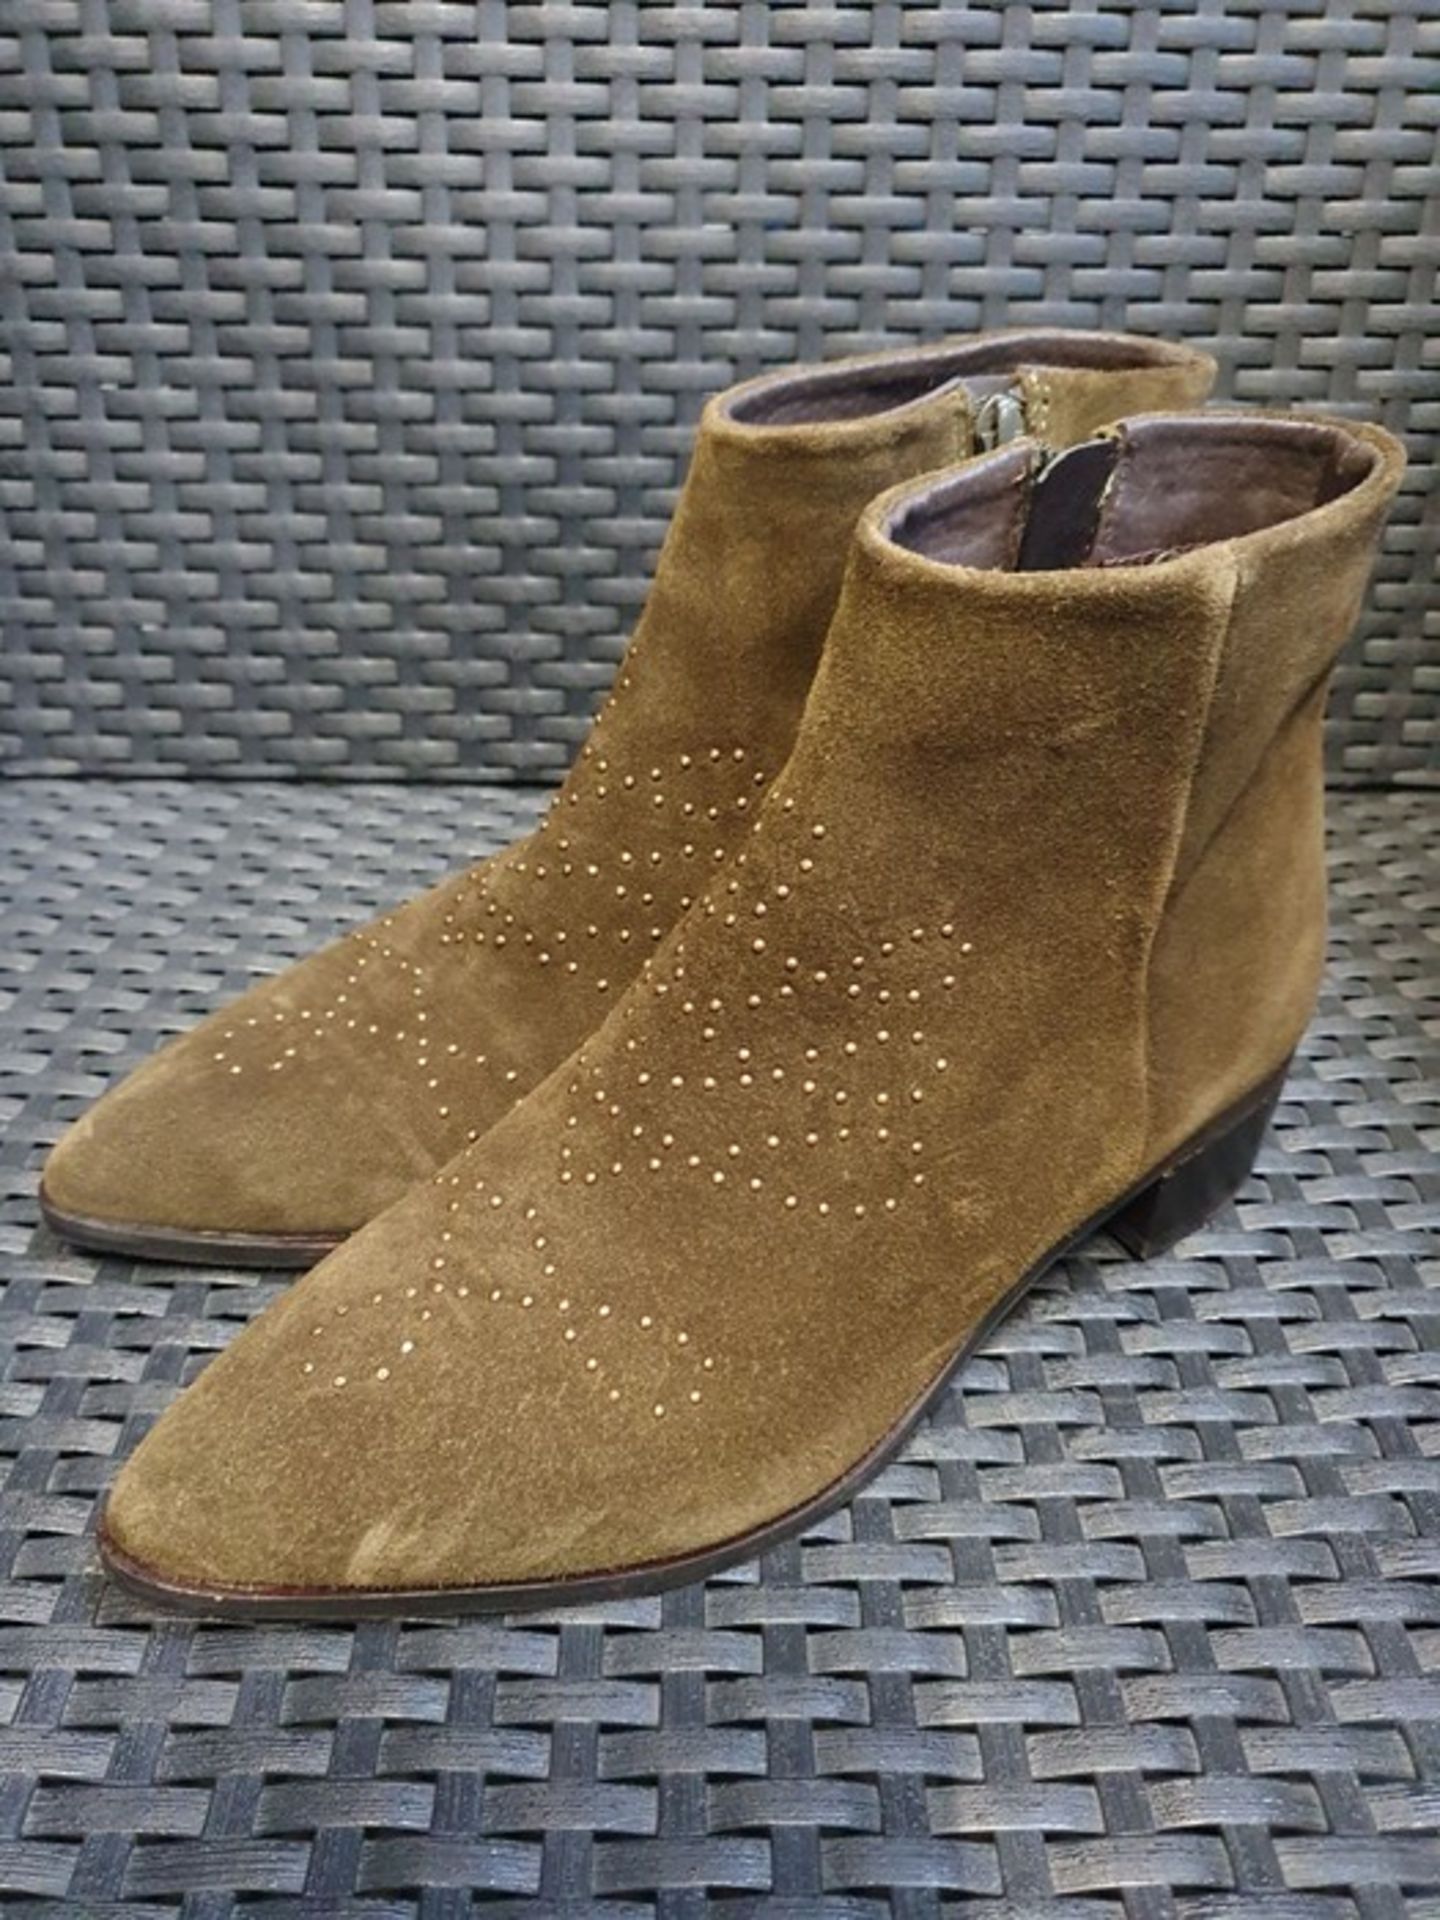 ONE PAIR OF LA REDOUTE COLLECTIONS STUDDED SUEDE ANKLE BOOTS IN KHAKI - SIZE UK 5.5. RRP £88.00.